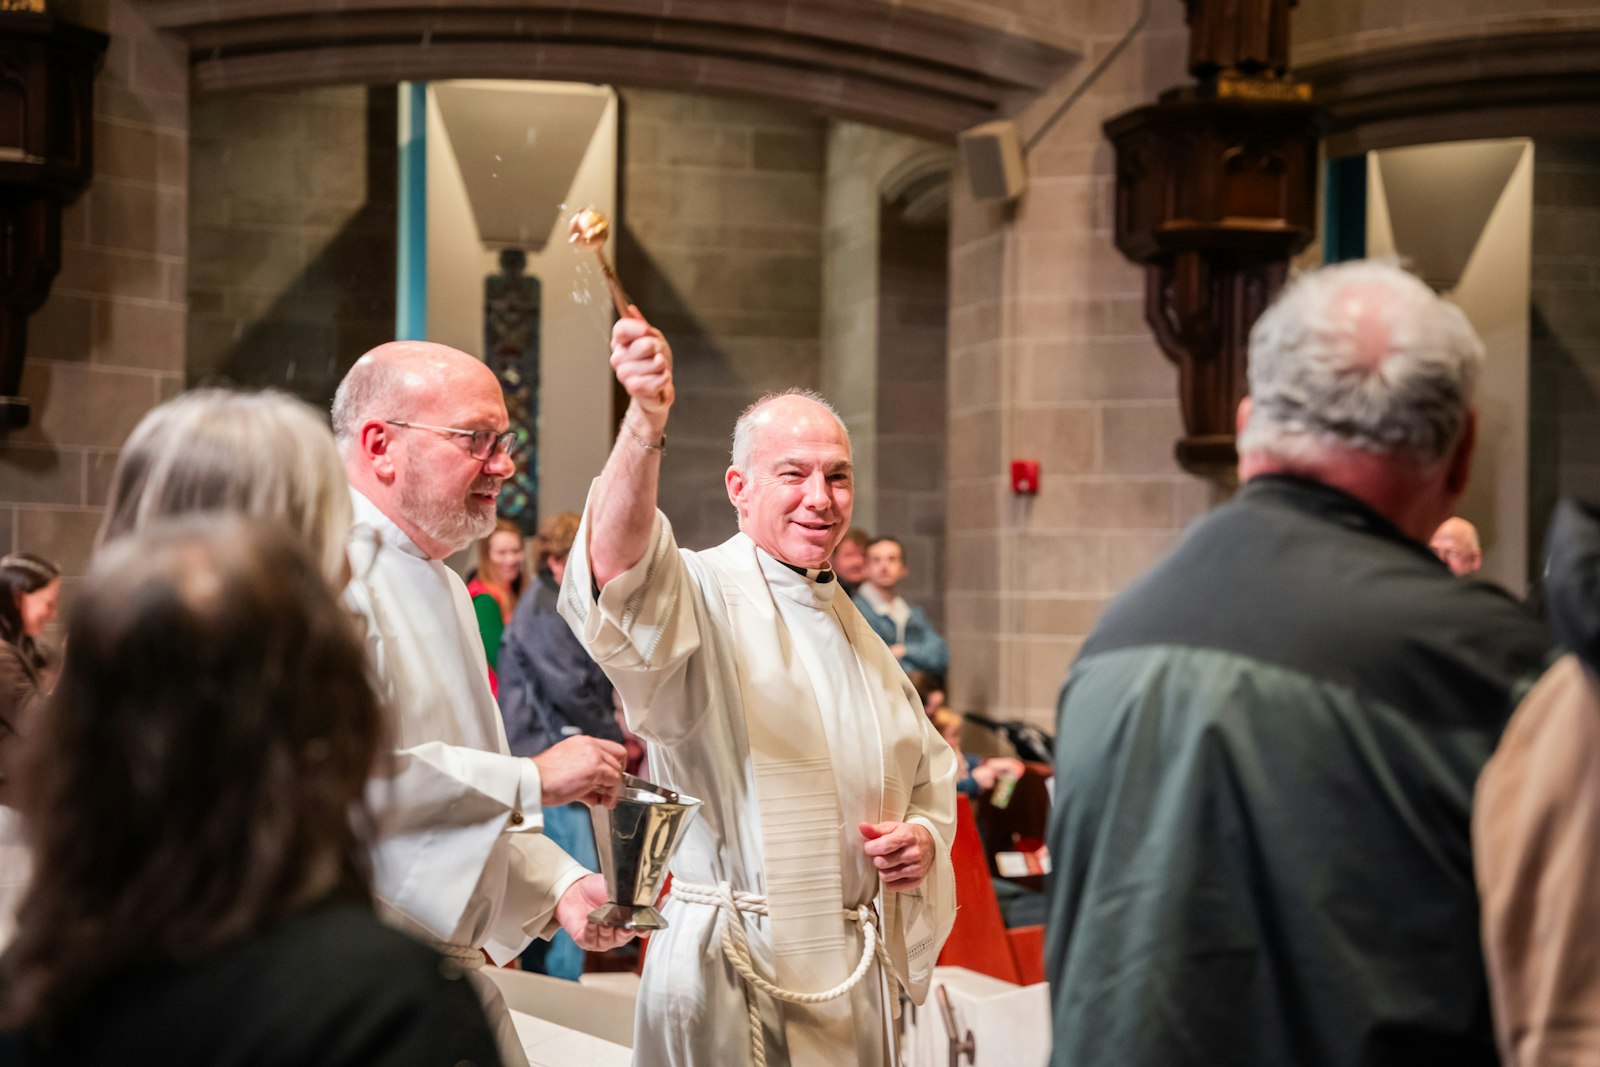 Cathedral rector Fr. J.J. Mech blesses the congregation with holy water during the dedication service. Fr. Mech's vision for the project started several years earlier, and included the rescue of the statues from the closed St. Benedict Church in Highland Park.